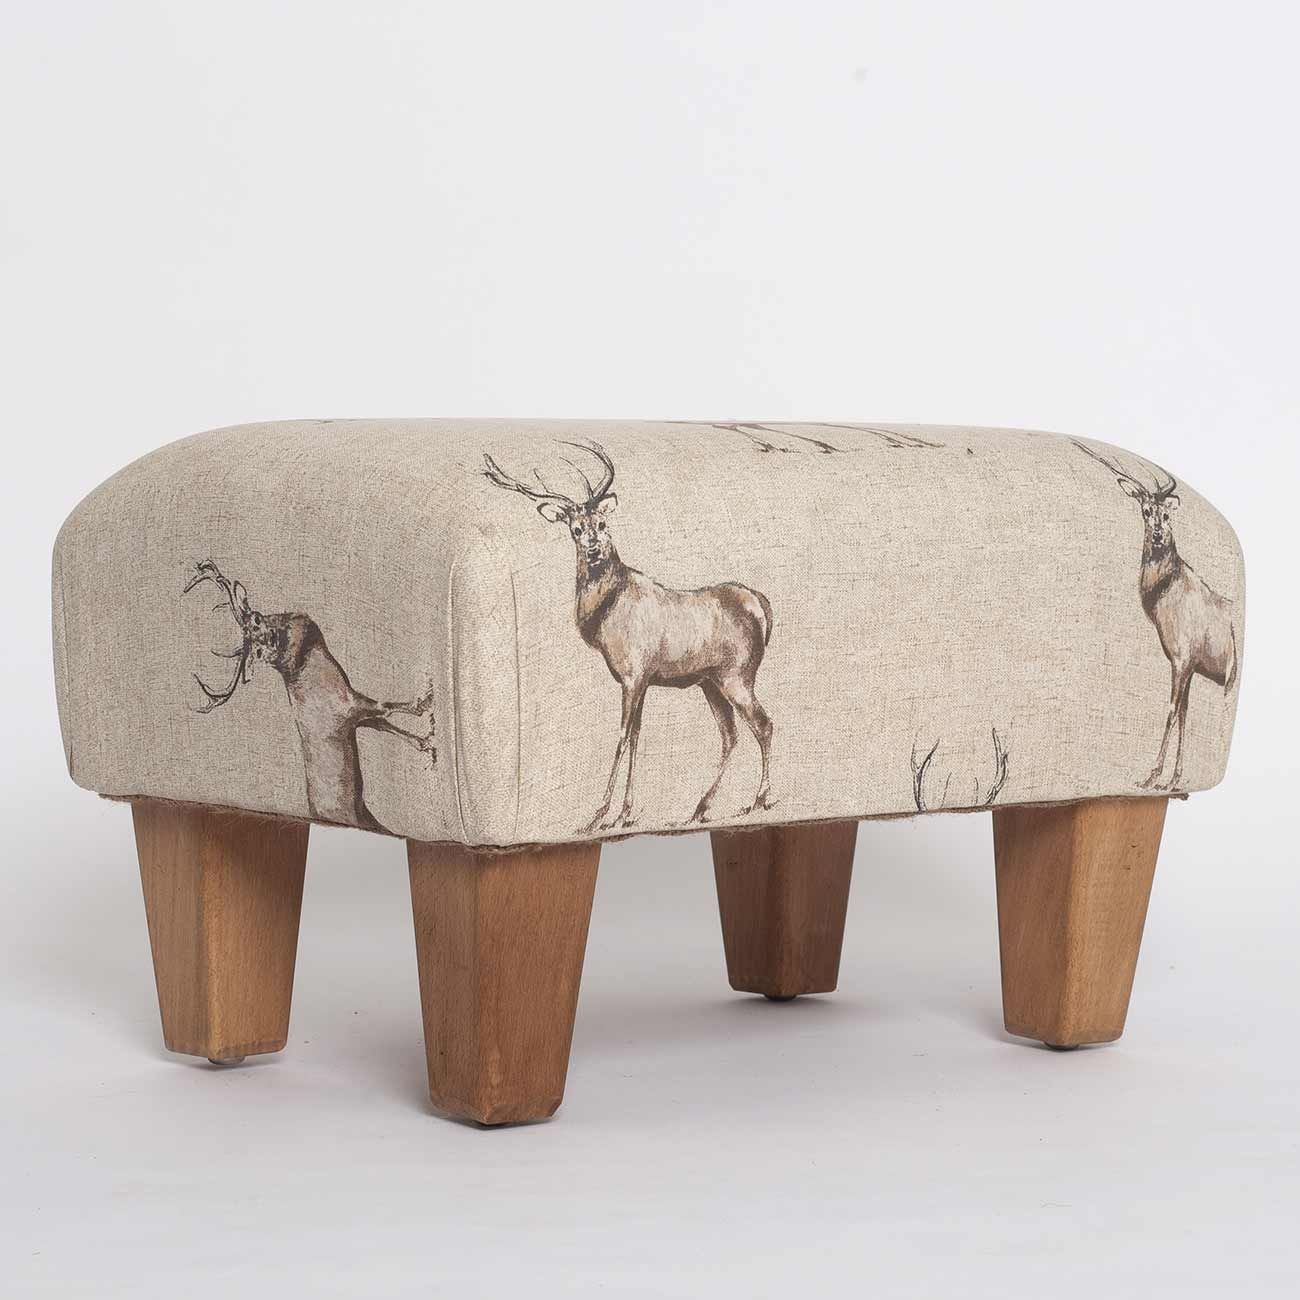 stag-print-footstool5 fabric from JLP